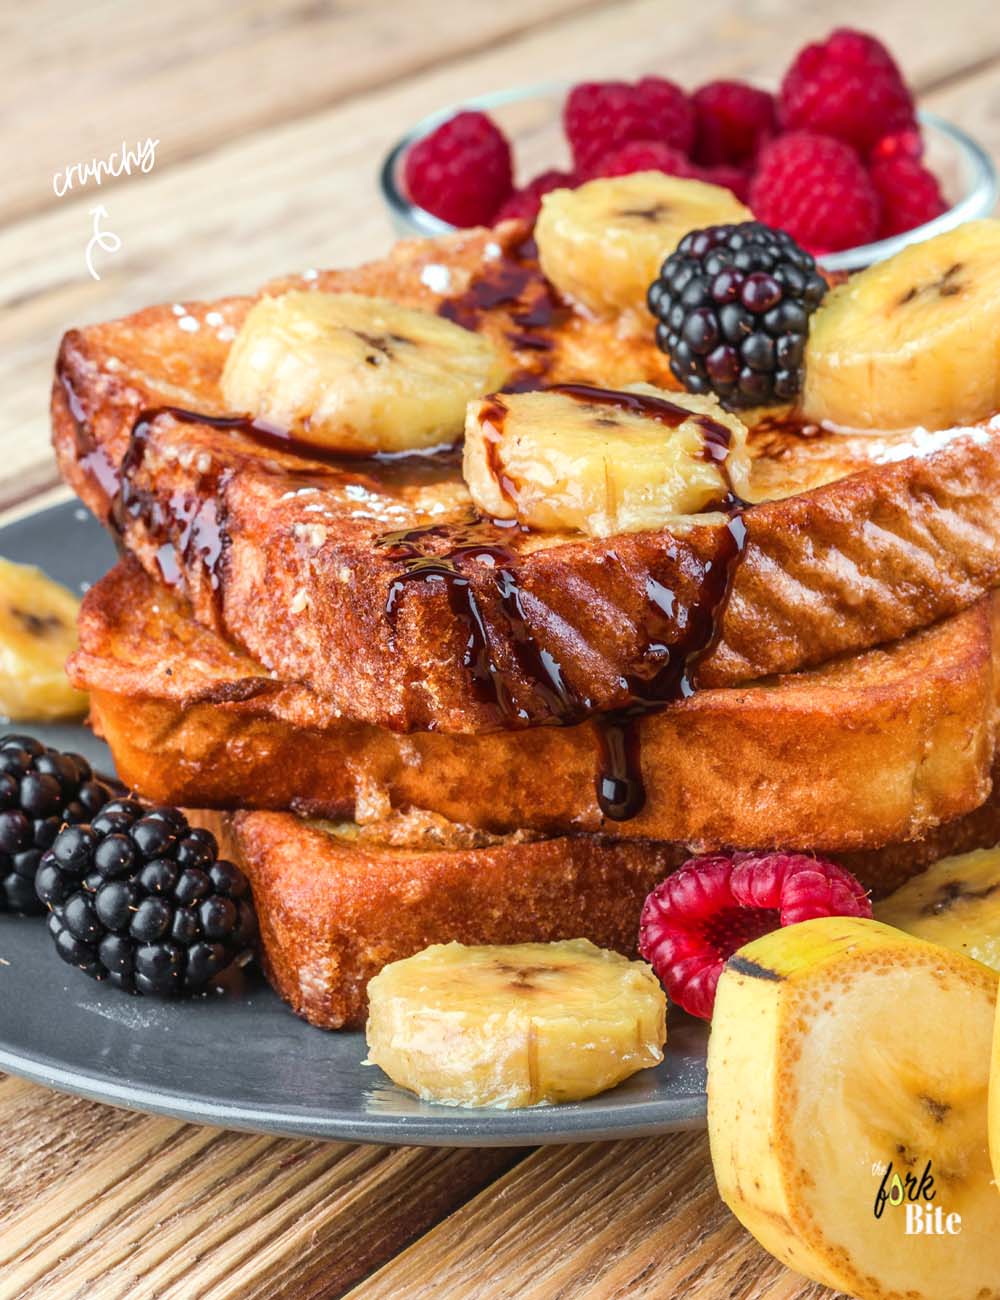 What goes well with French toast? There are no inhibitions on what and how you want to top your toast. You can add something sweet, spicy, savory, or something in between.